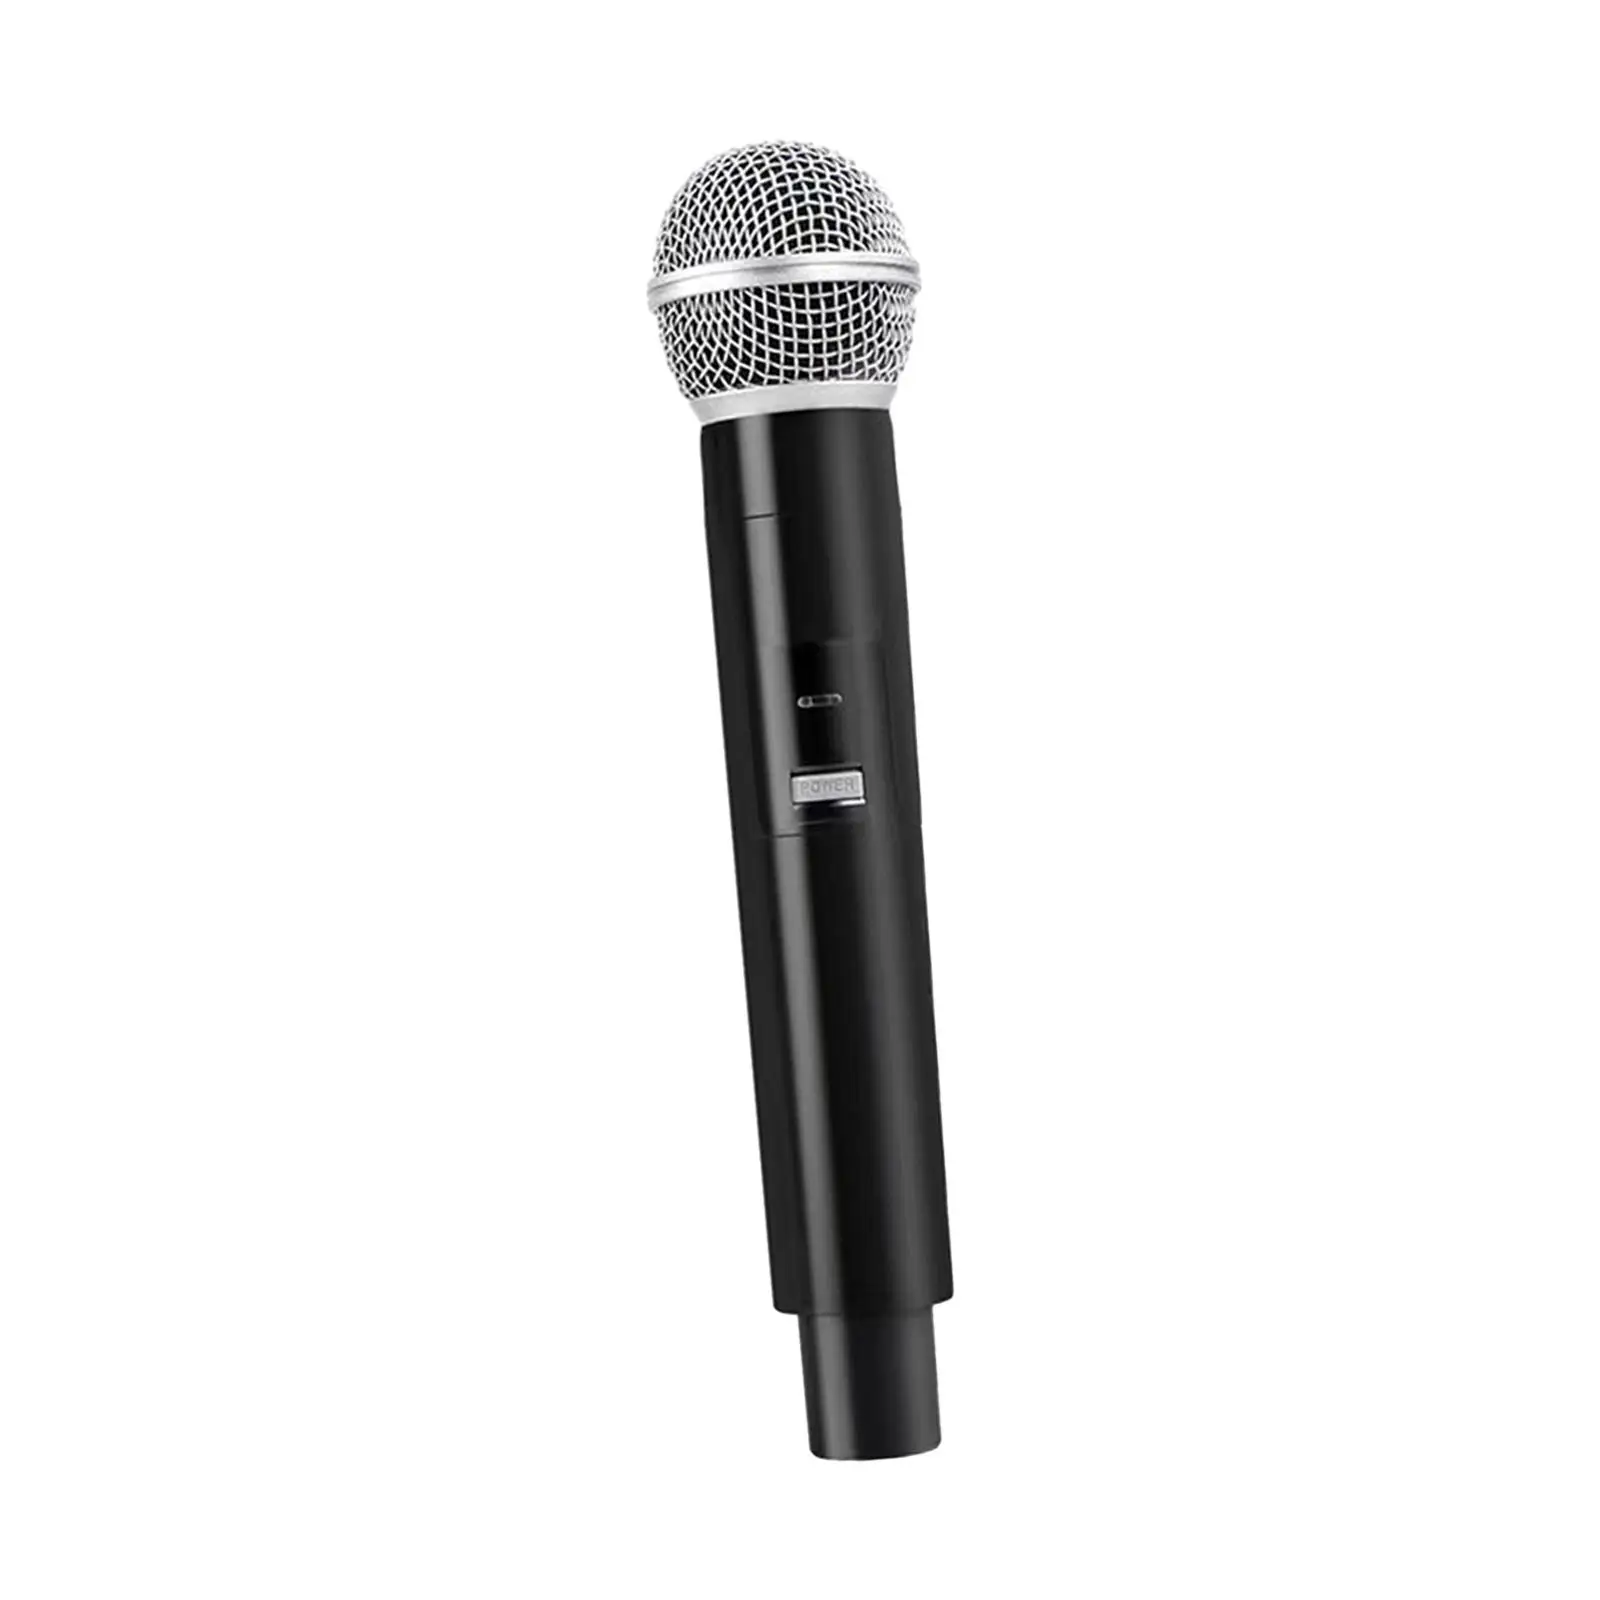 Artificial Microphone Pretend Play Halloween Play Handheld Realistic Prop Microphone for Party Cosplay Weddings Costume